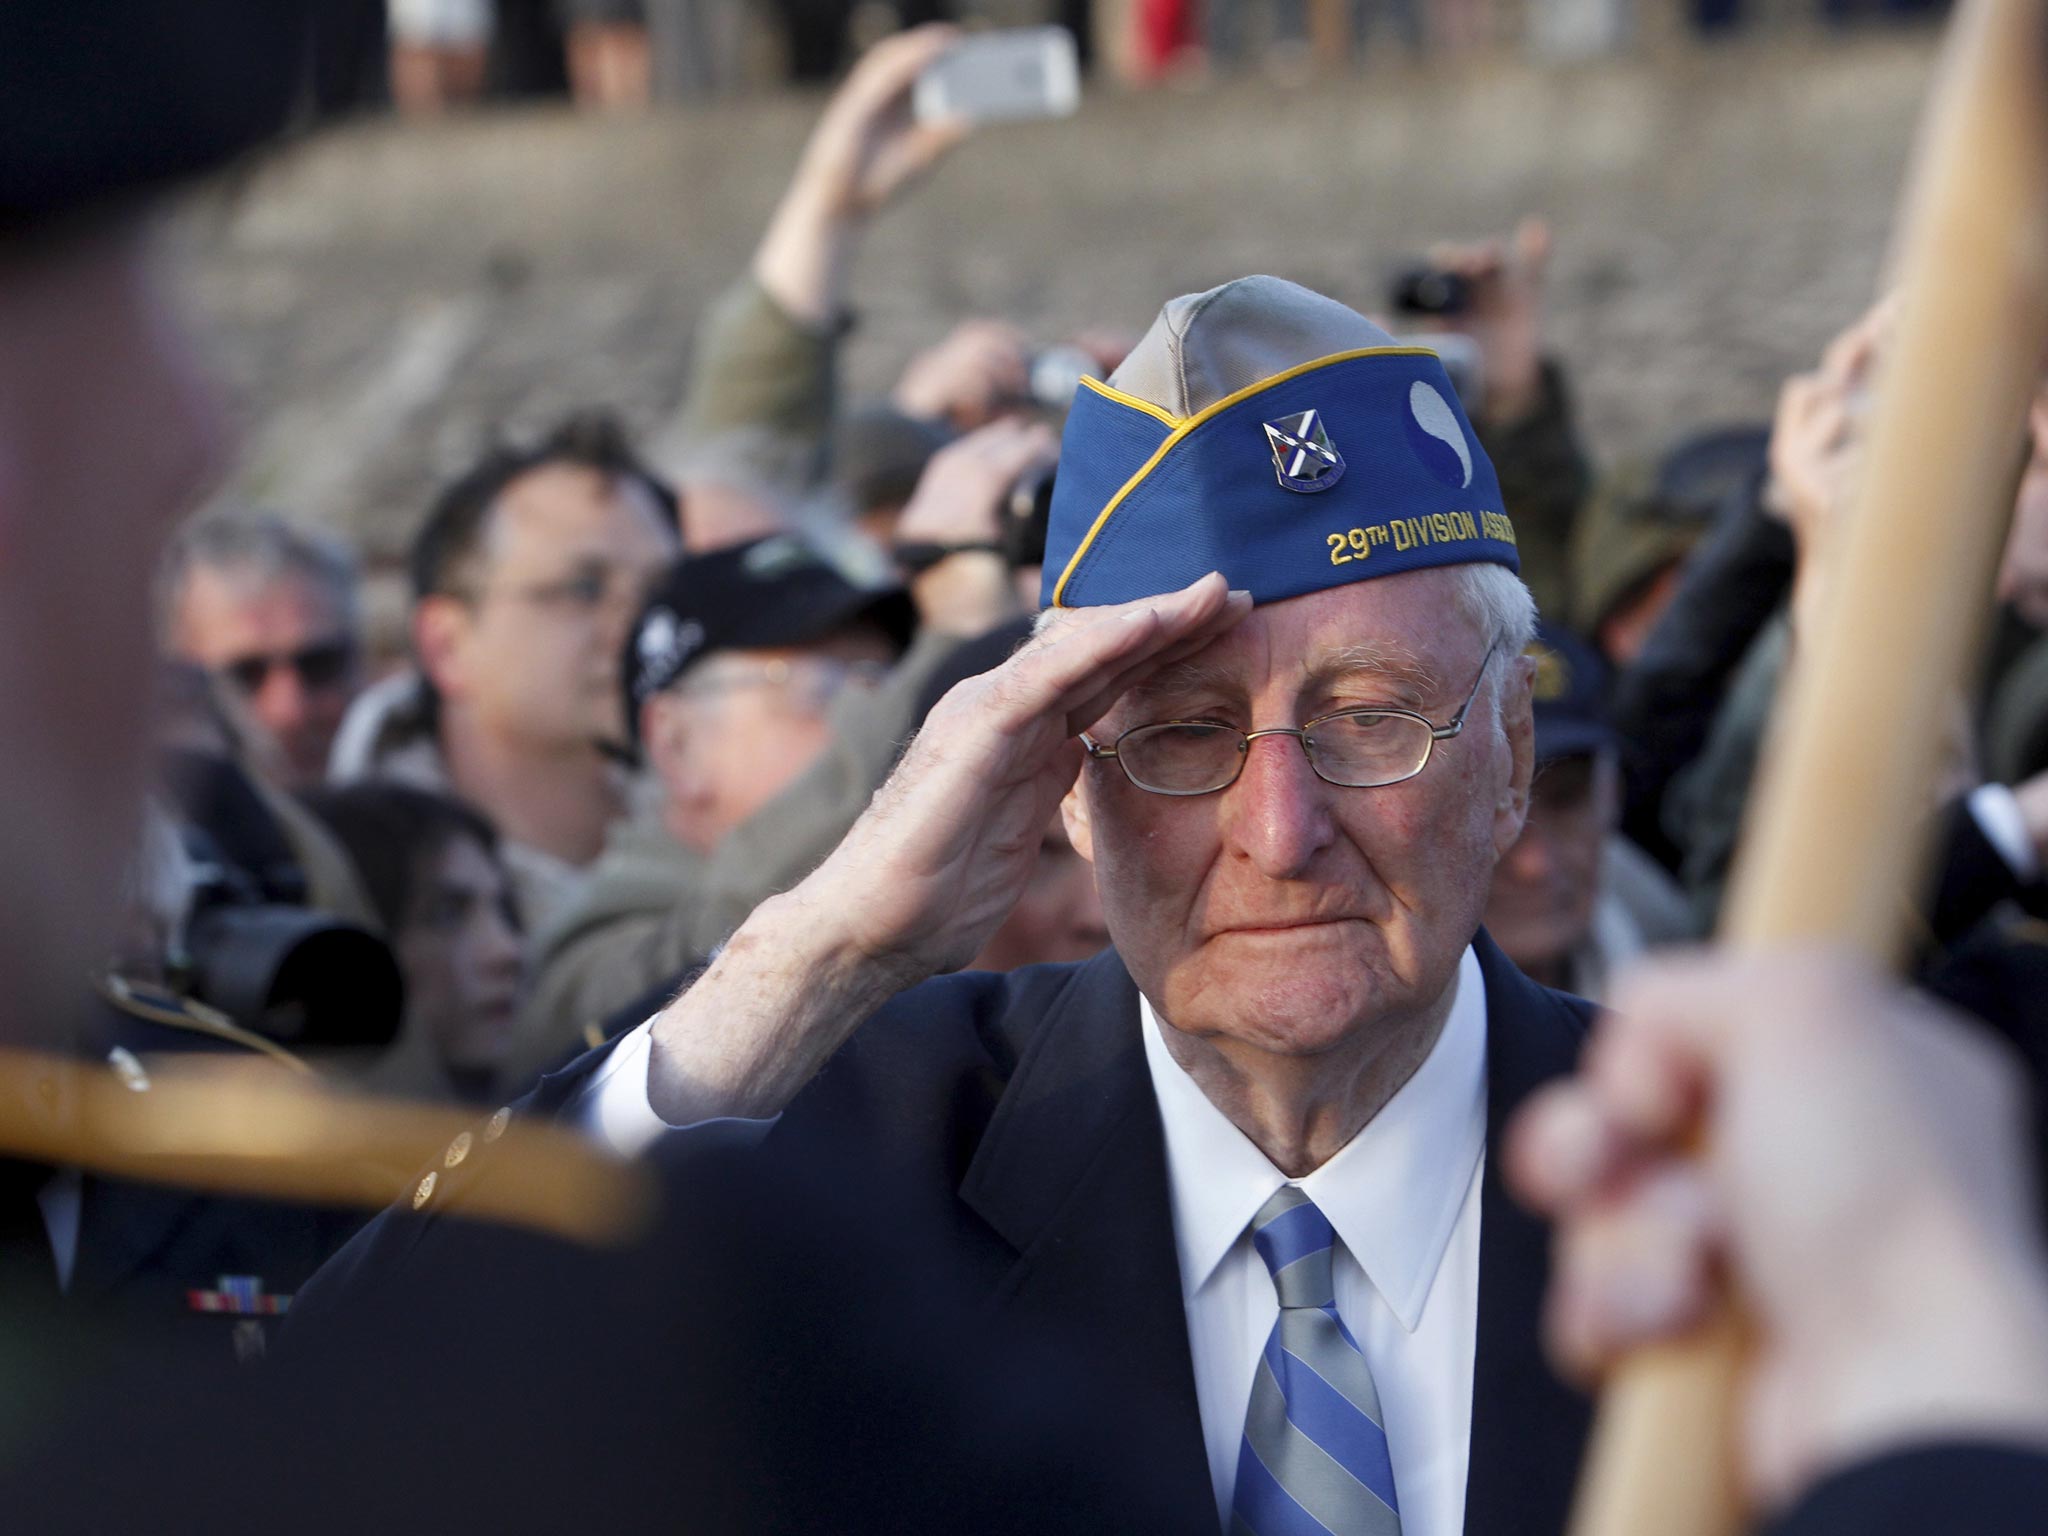 Veteran Morley Piper, 90, salutes during a D-Day commemoration, on Omaha Beach in Vierville sur Mer, western France